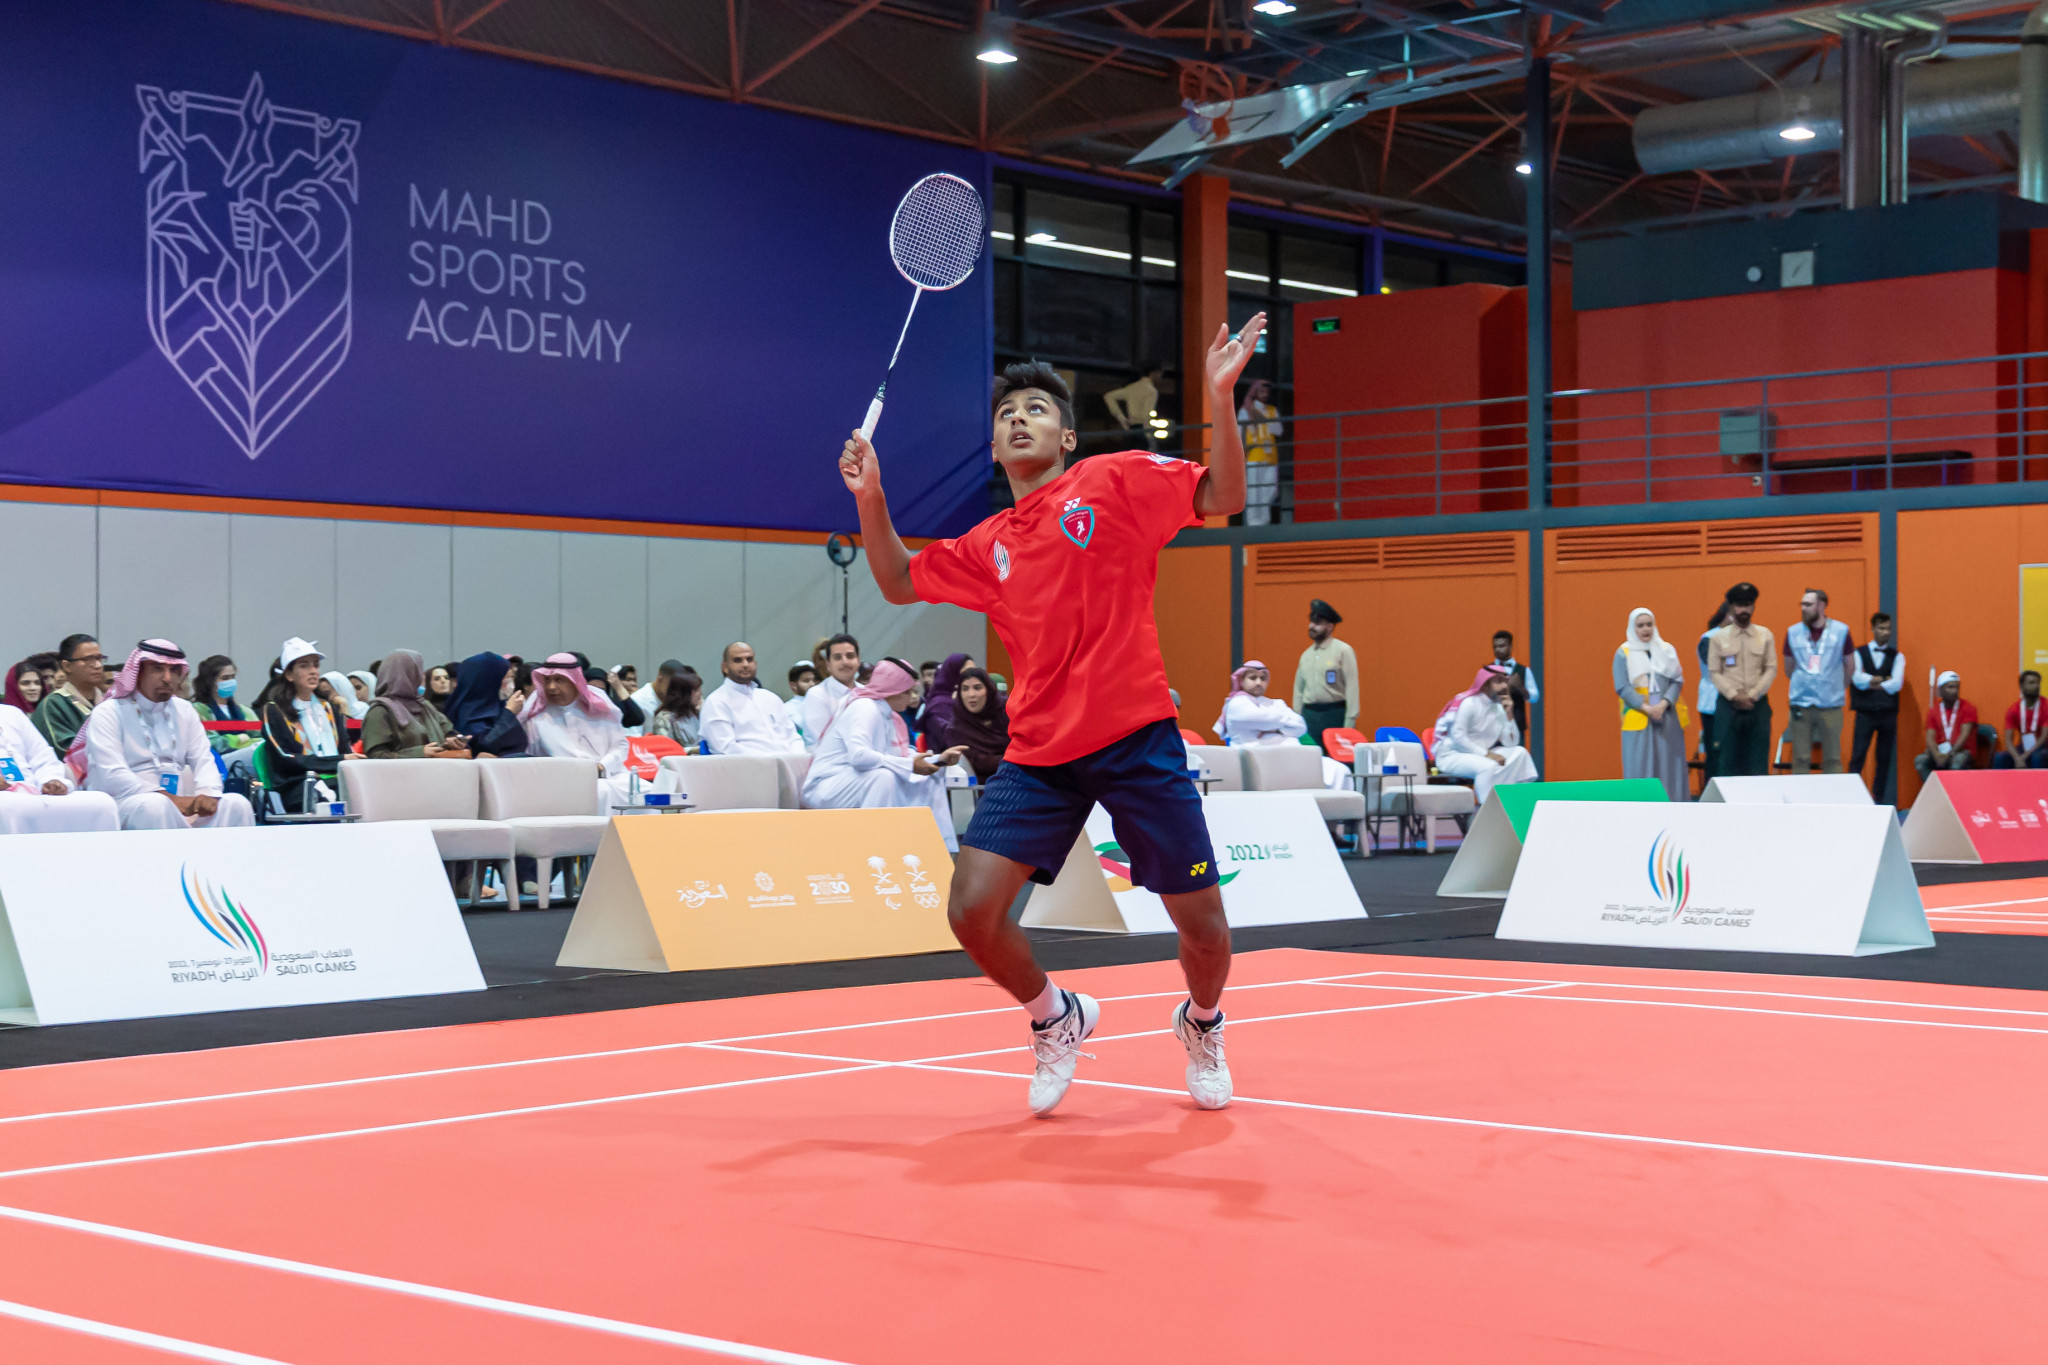 Mehad Shah and Kothoor ease to badminton gold medals